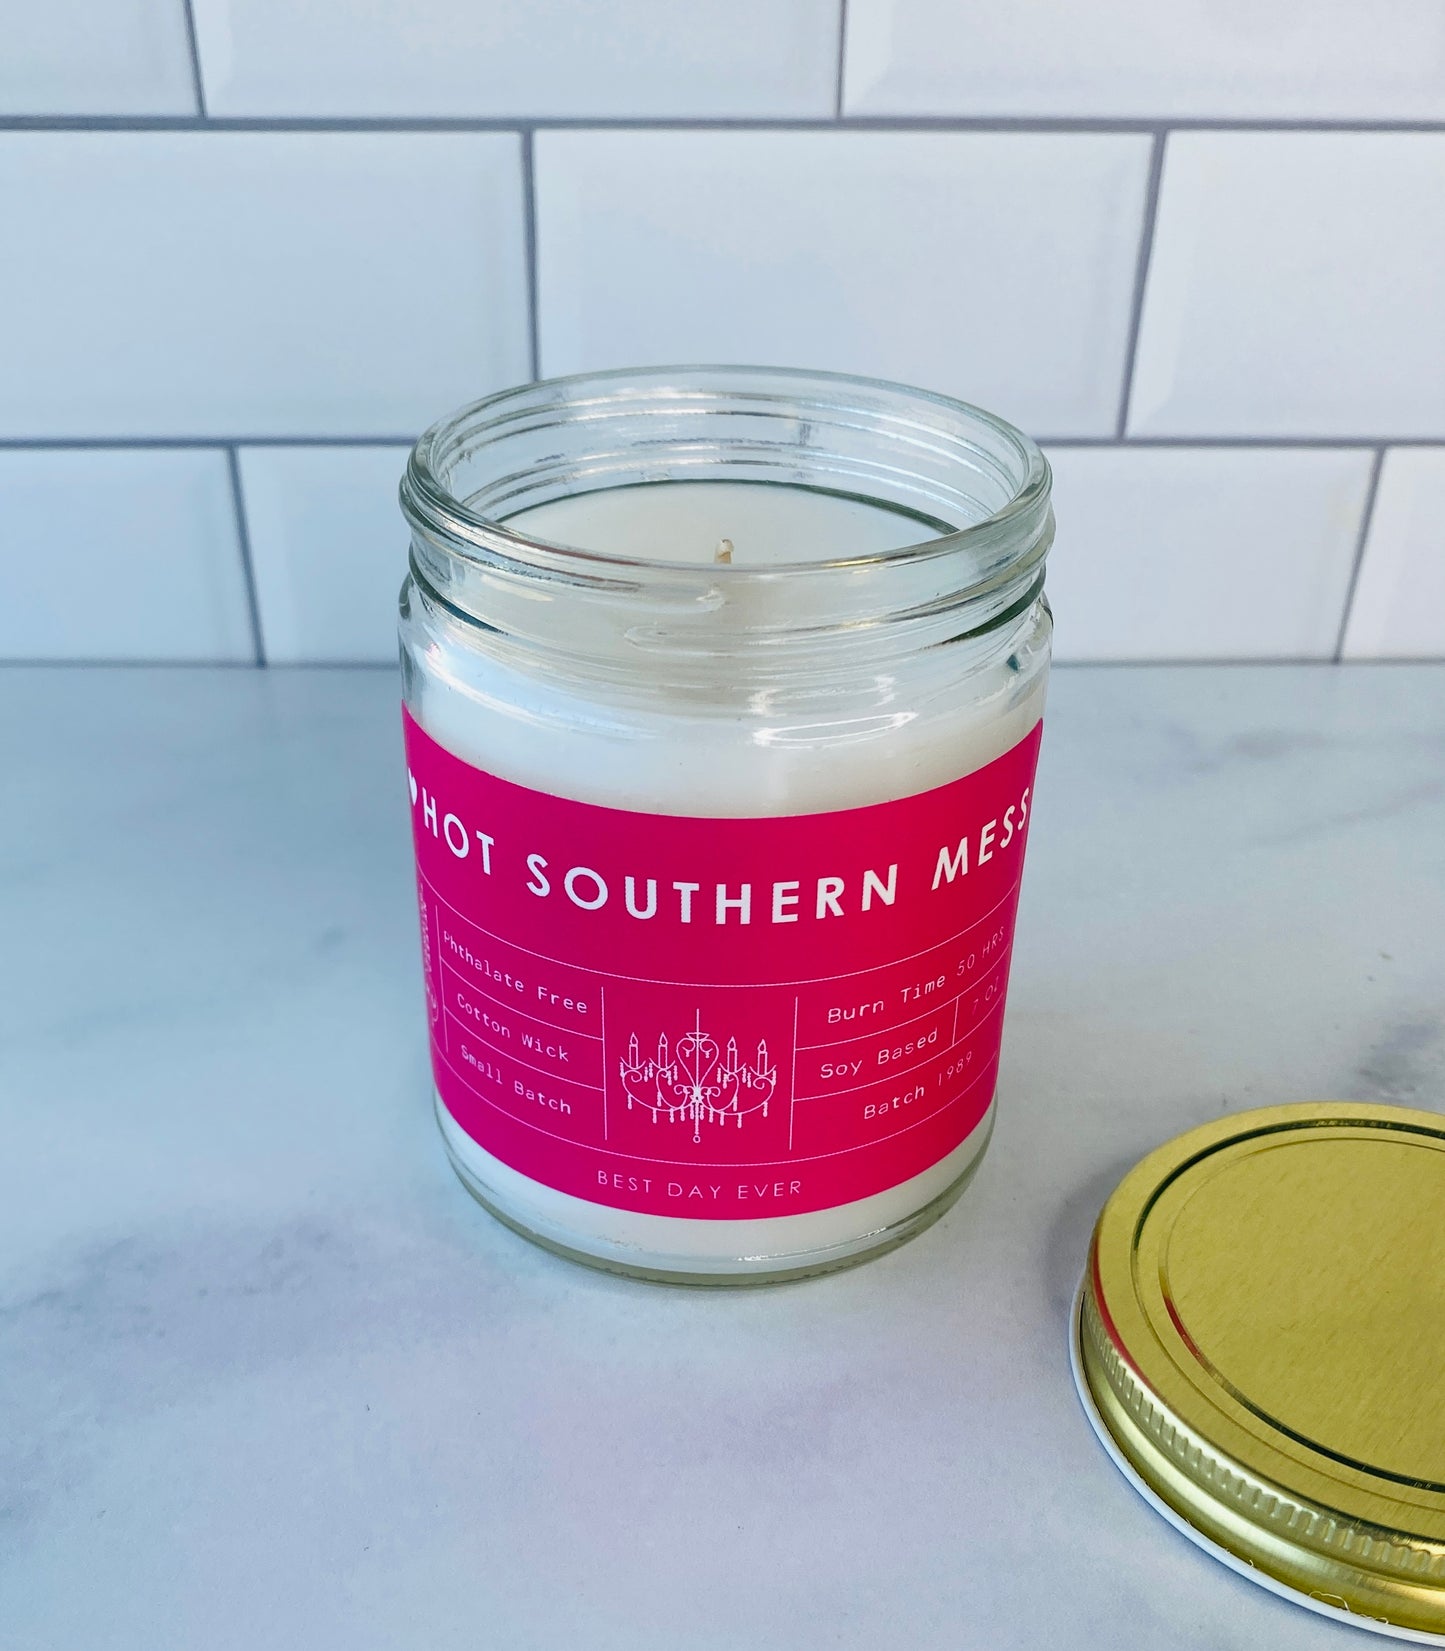 Hot Southern Mess Candle